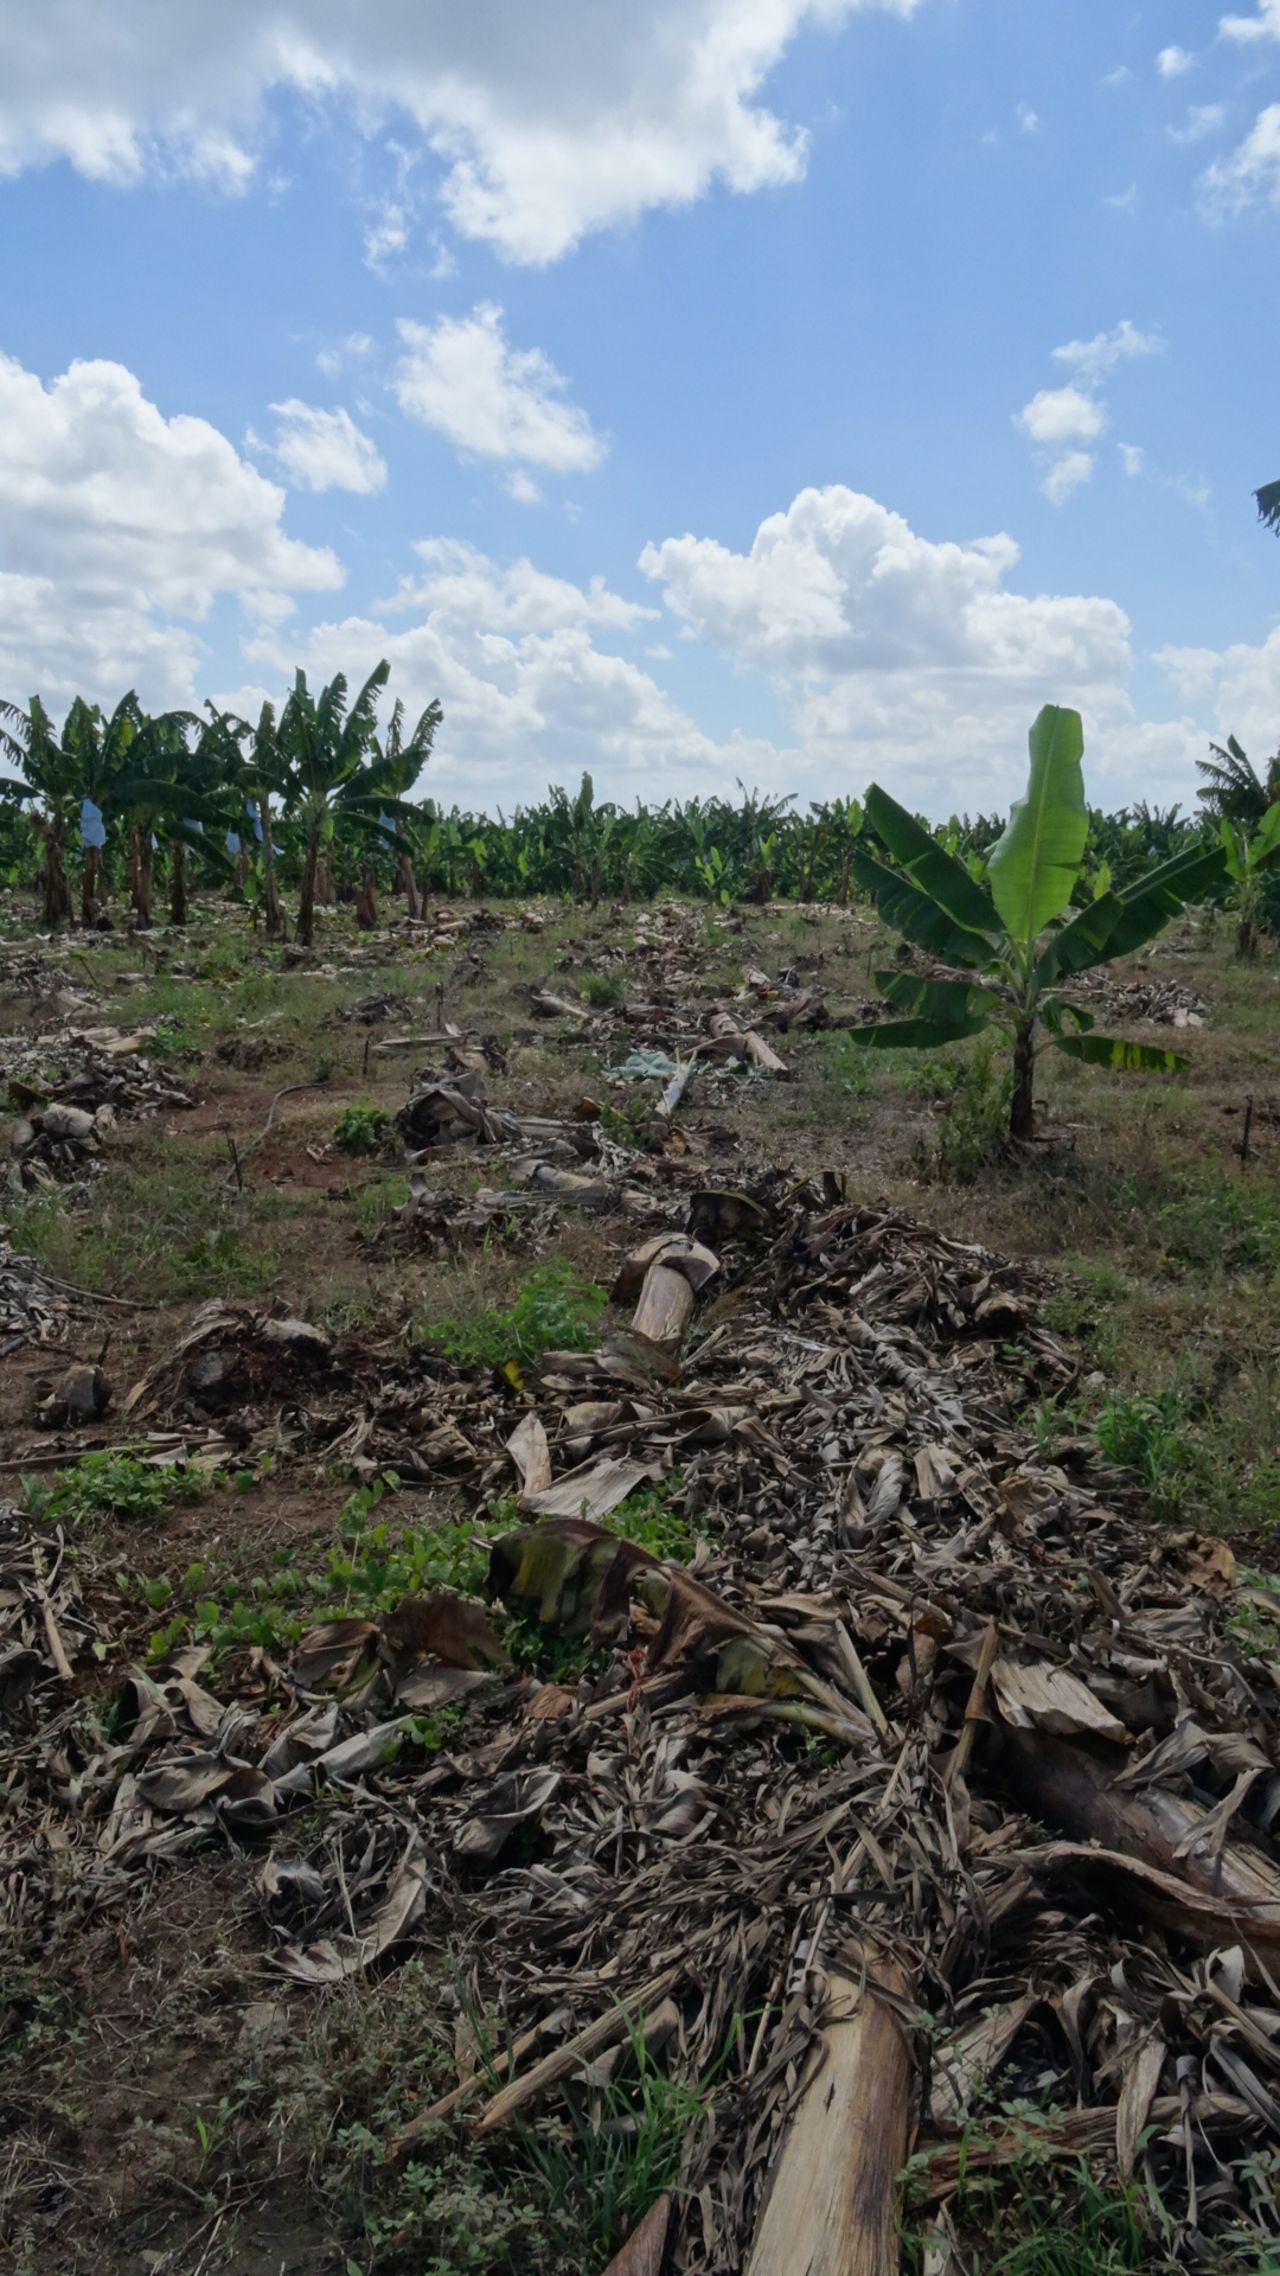 So far, the disease in Africa seems to be contained to just two banana plantations in Mozambique, one of which is pictured here.